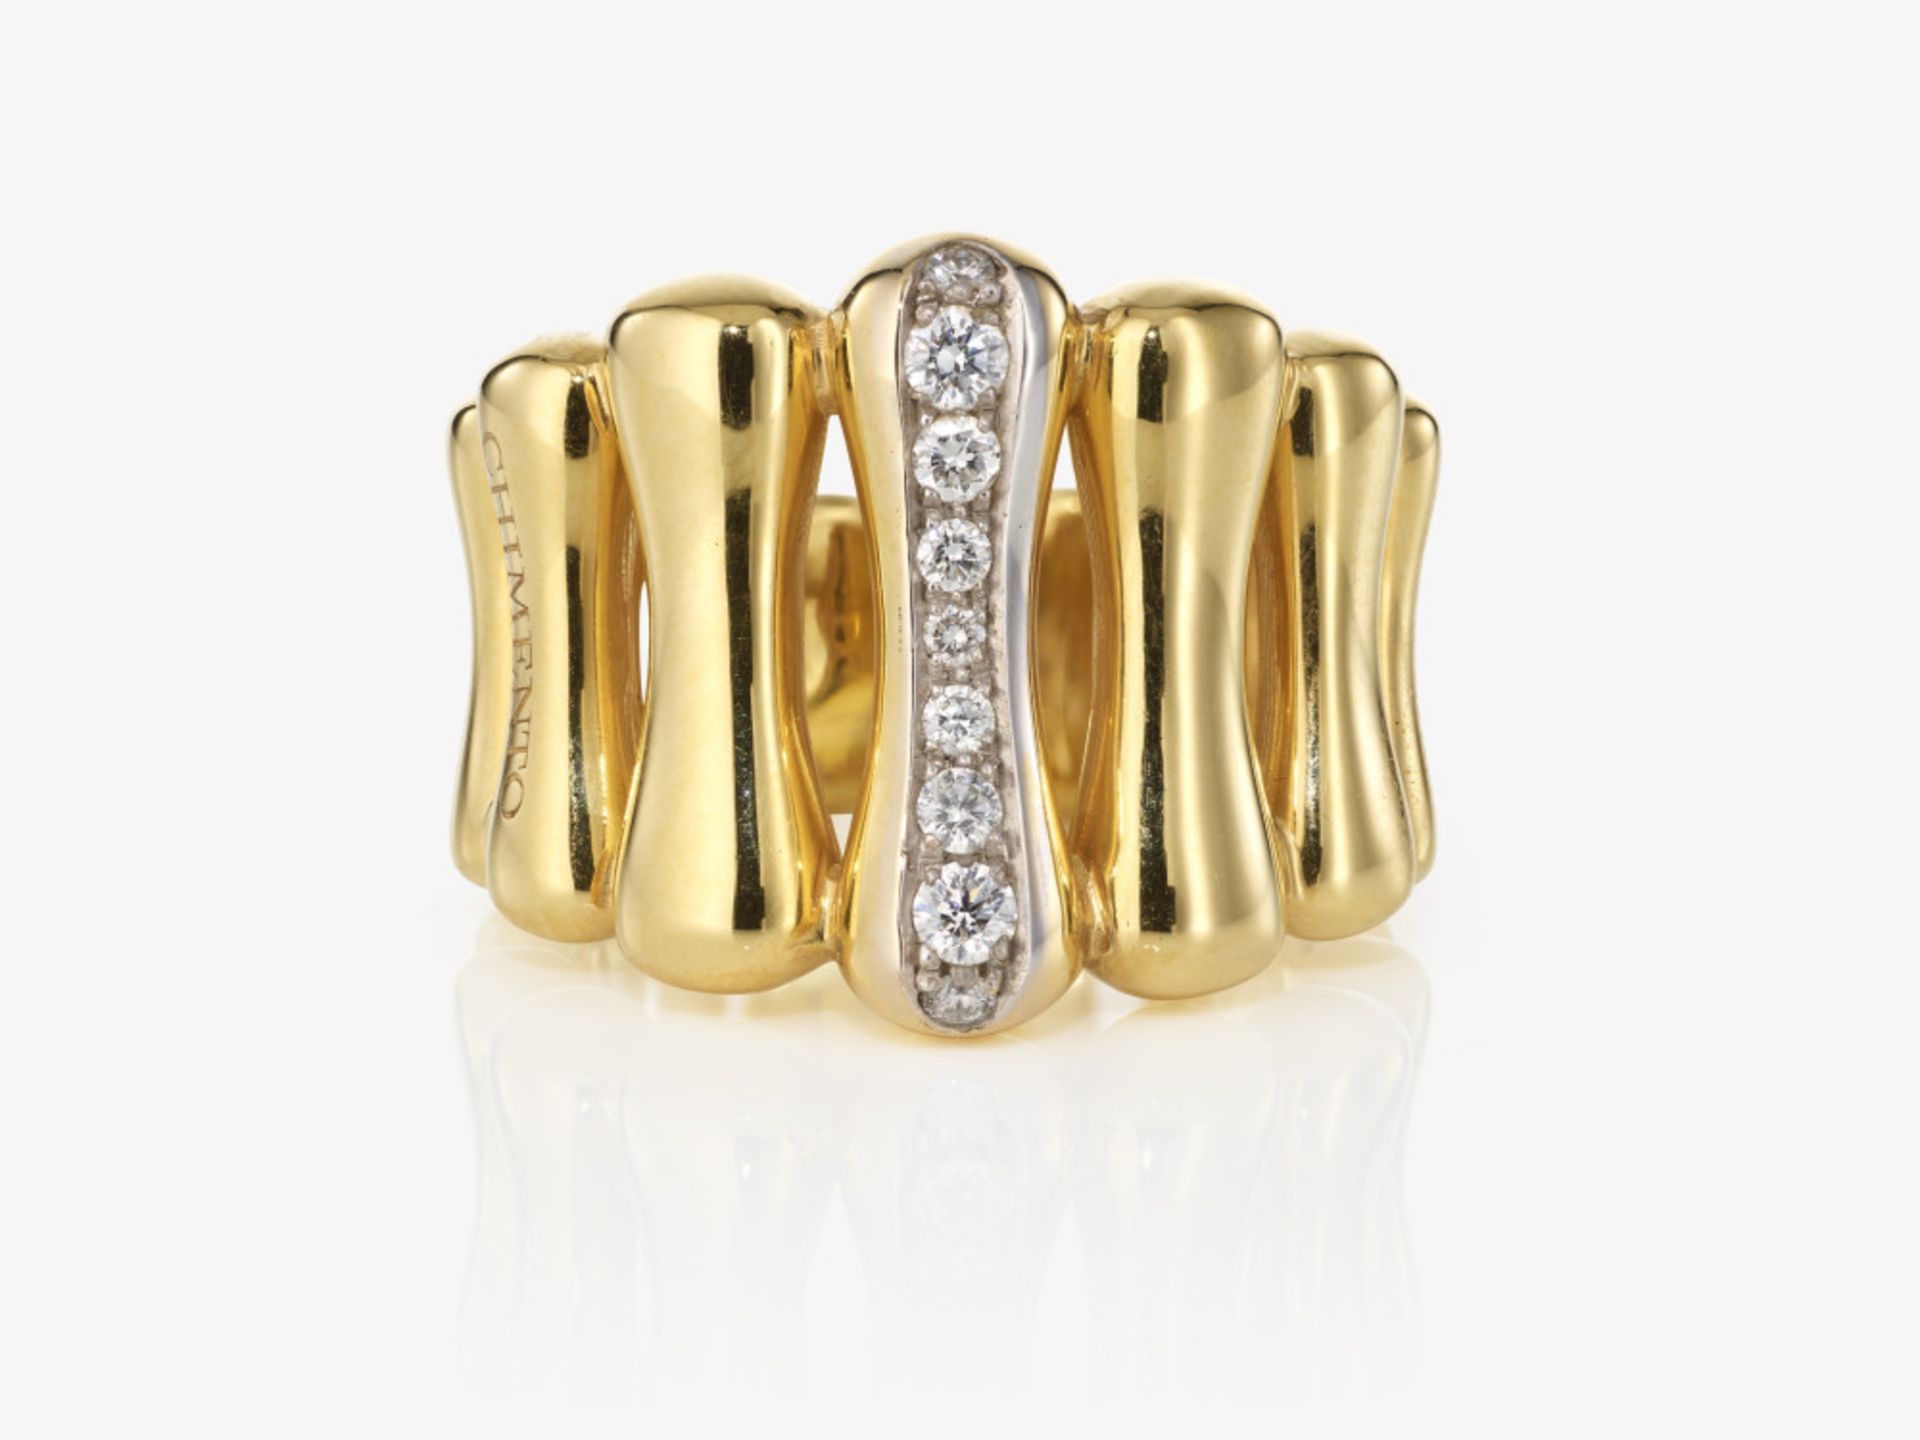 A ring with brilliant-cut diamonds - Image 4 of 4